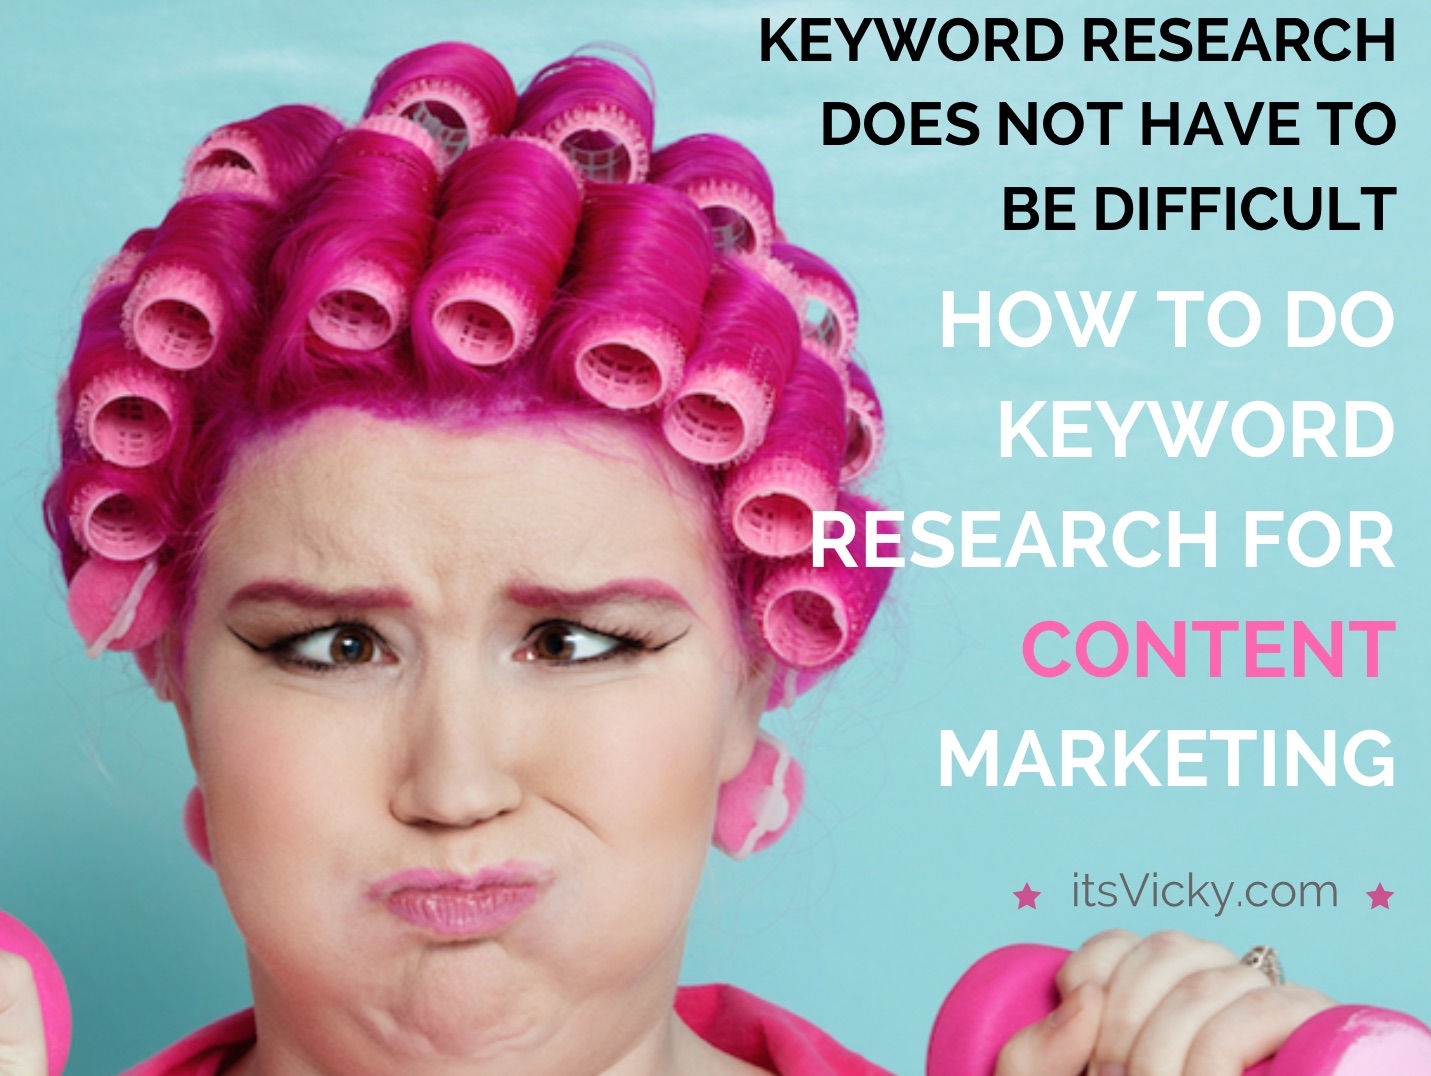 Keywords 101 – How to Do Keyword Research for Content Marketing